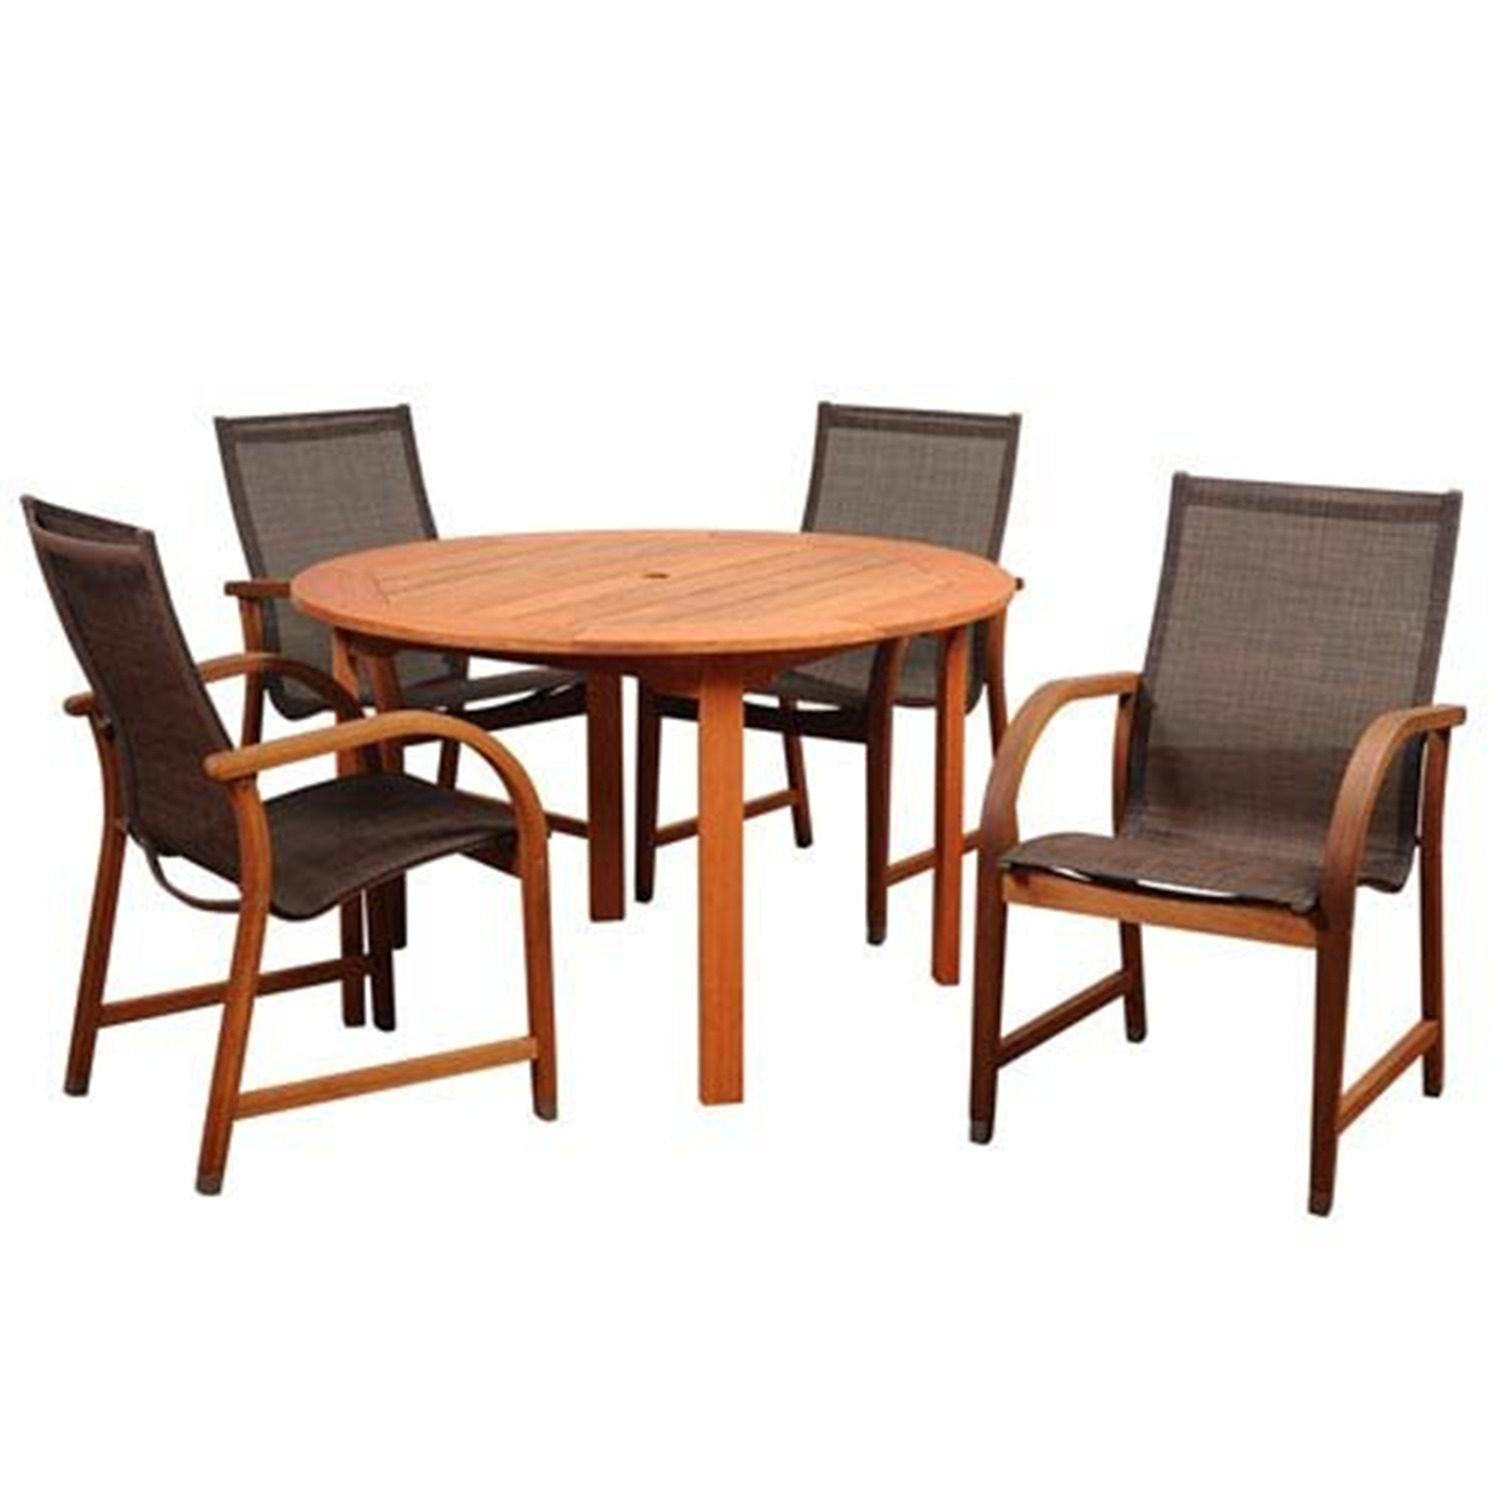 International Home Amazonia 5 Piece Round Patio Dining Set in Brown - image 1 of 5